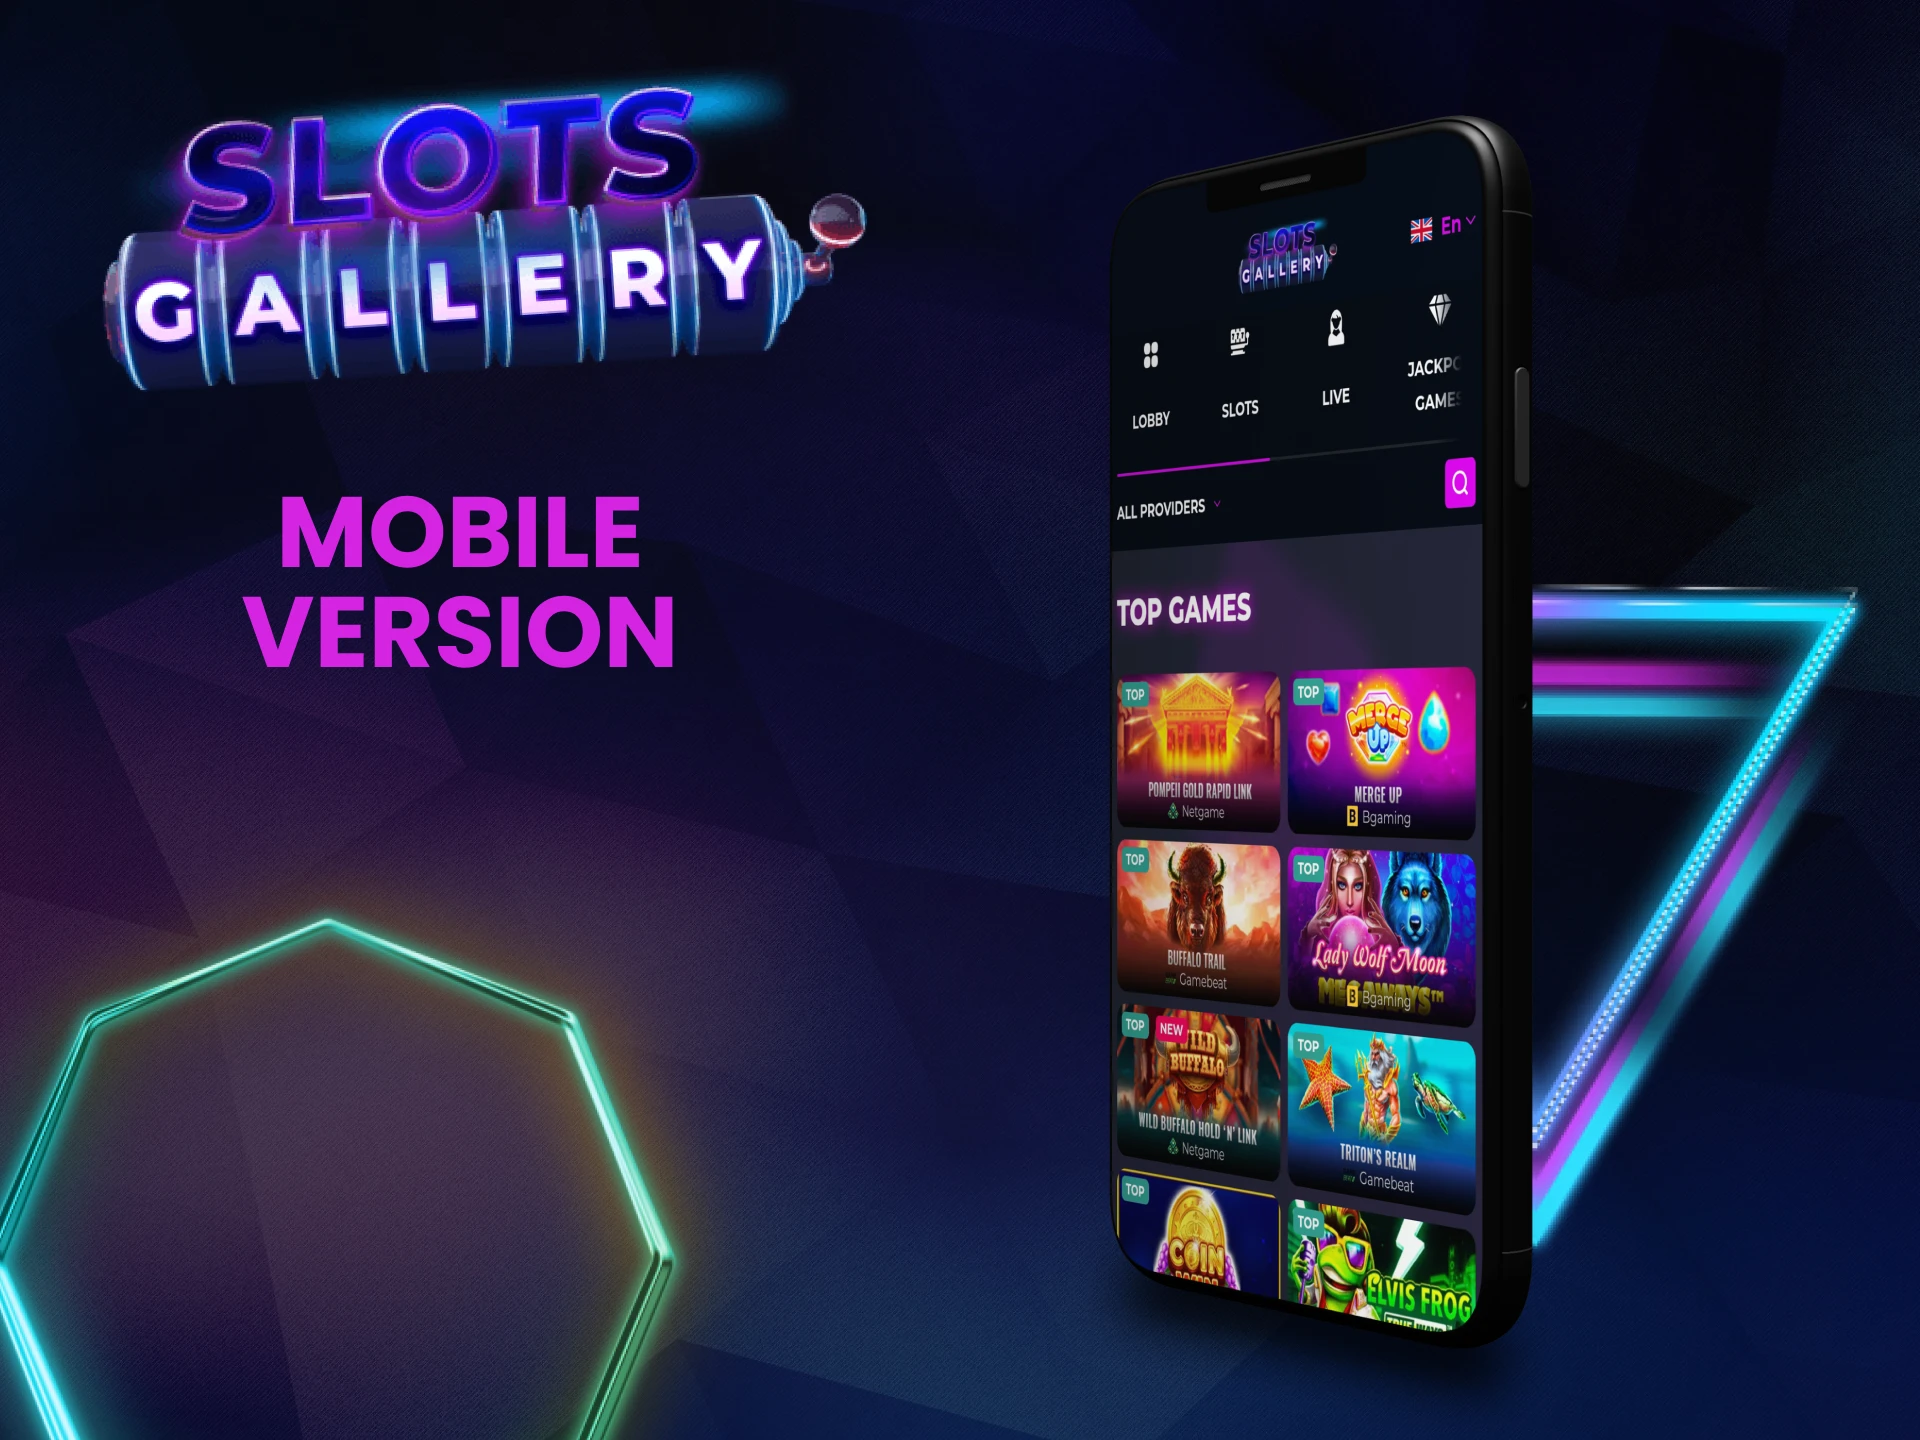 Visit the mobile version of the Slots Gallery website.